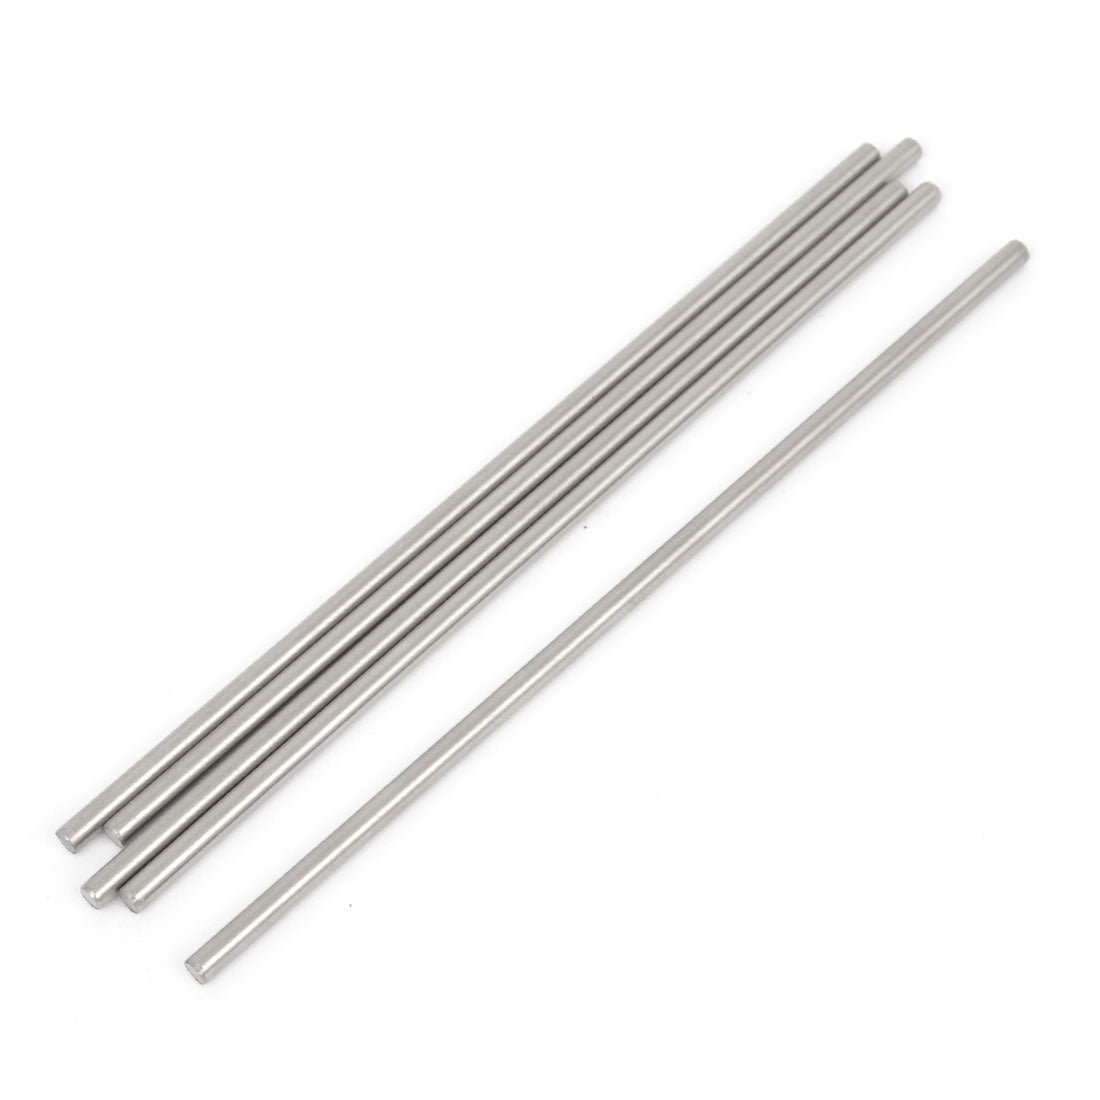 uxcell Uxcell 5 Pcs RC Airplane Model Part Stainless Steel Round Rods Axles Bars 3mm x 120mm